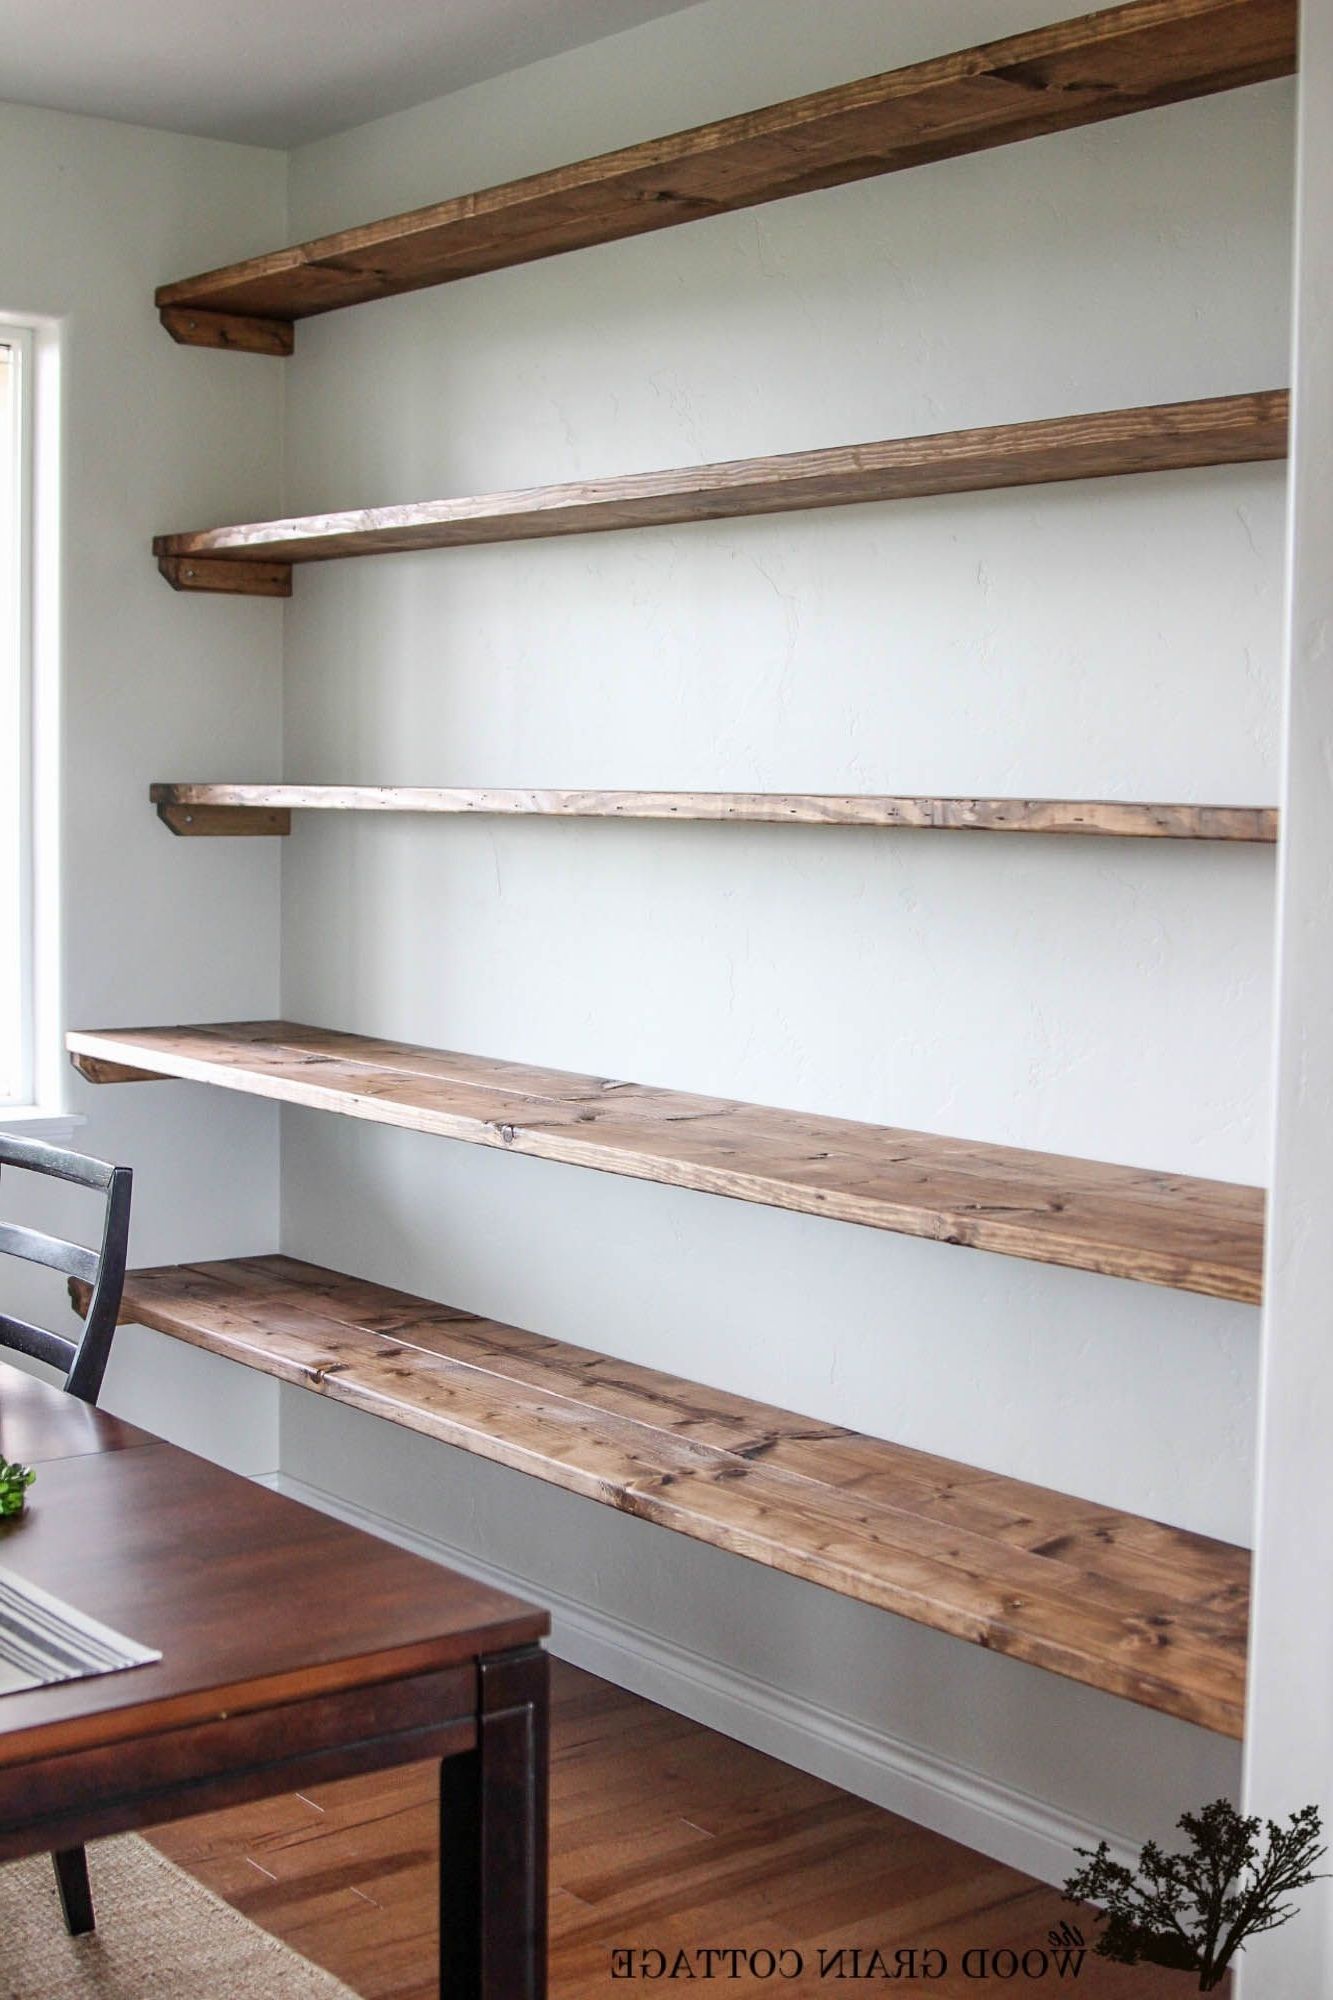 Shelving, Wood Grain And Patiently Within Wood For Shelves (View 1 of 15)